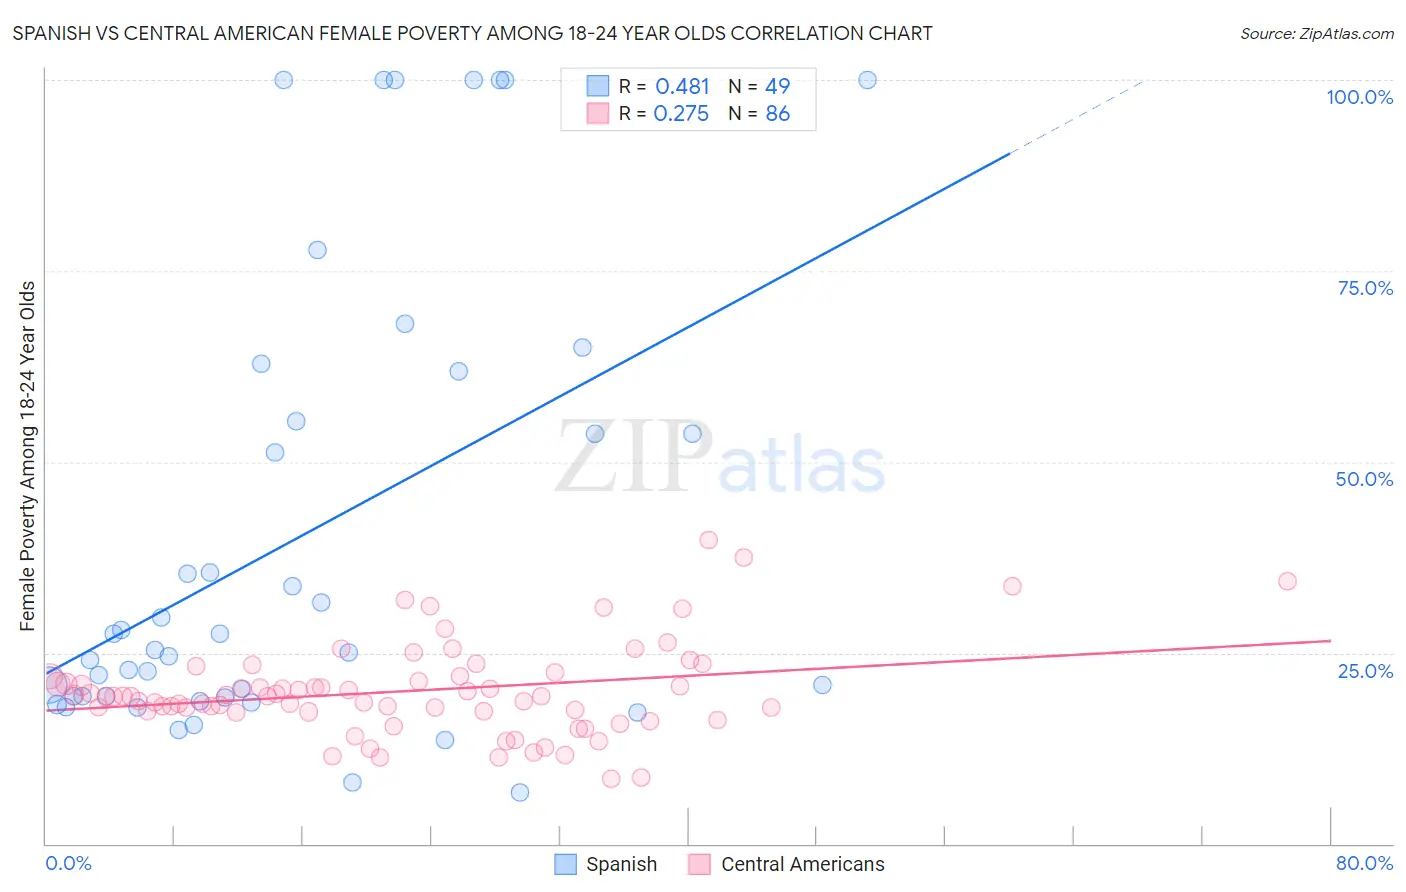 Spanish vs Central American Female Poverty Among 18-24 Year Olds